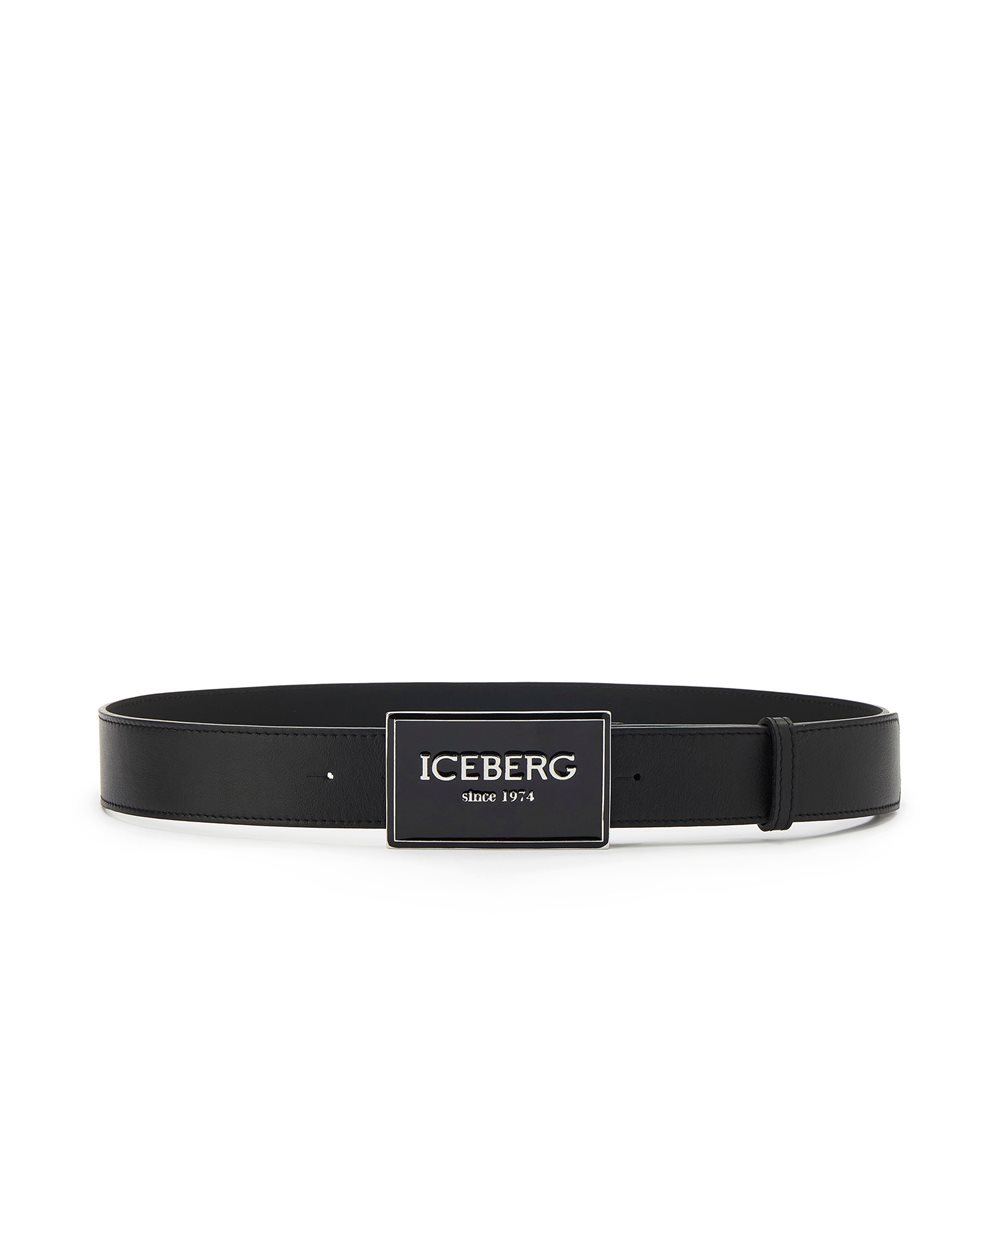 Leather belt with logoed buckle -  ( SECONDO STEP US ) PROMO UP TO 40% | Iceberg - Official Website